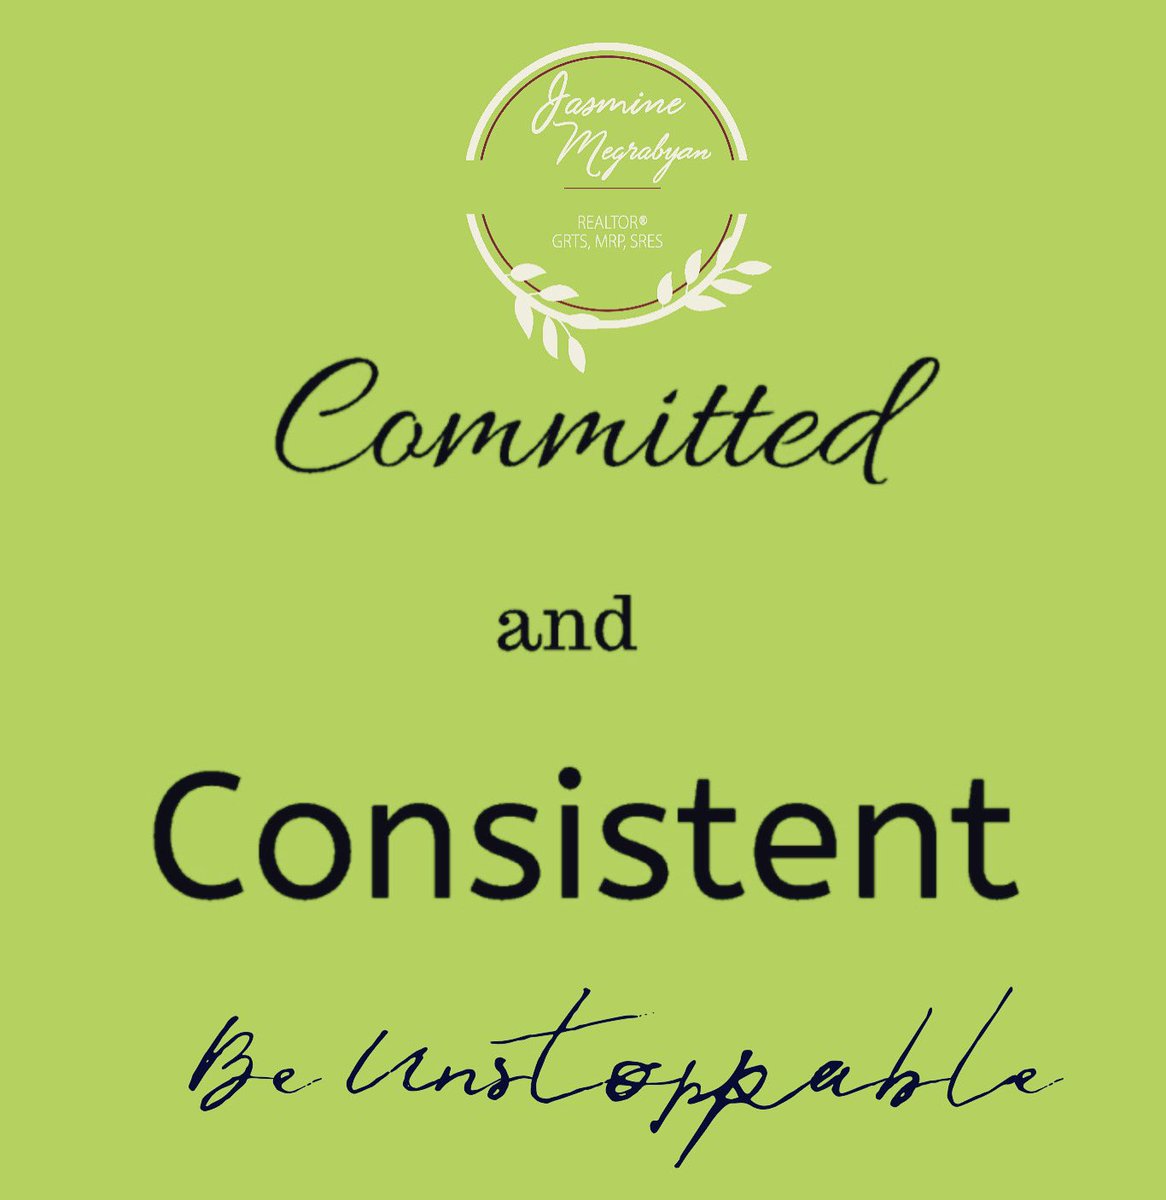 Be unstoppable and let commitment and consistency become the foundation for your daily actions!  #unstoppable #commitment #consistency #youractionsbecomeyourhabits #kwestatesbyjasmine🏡